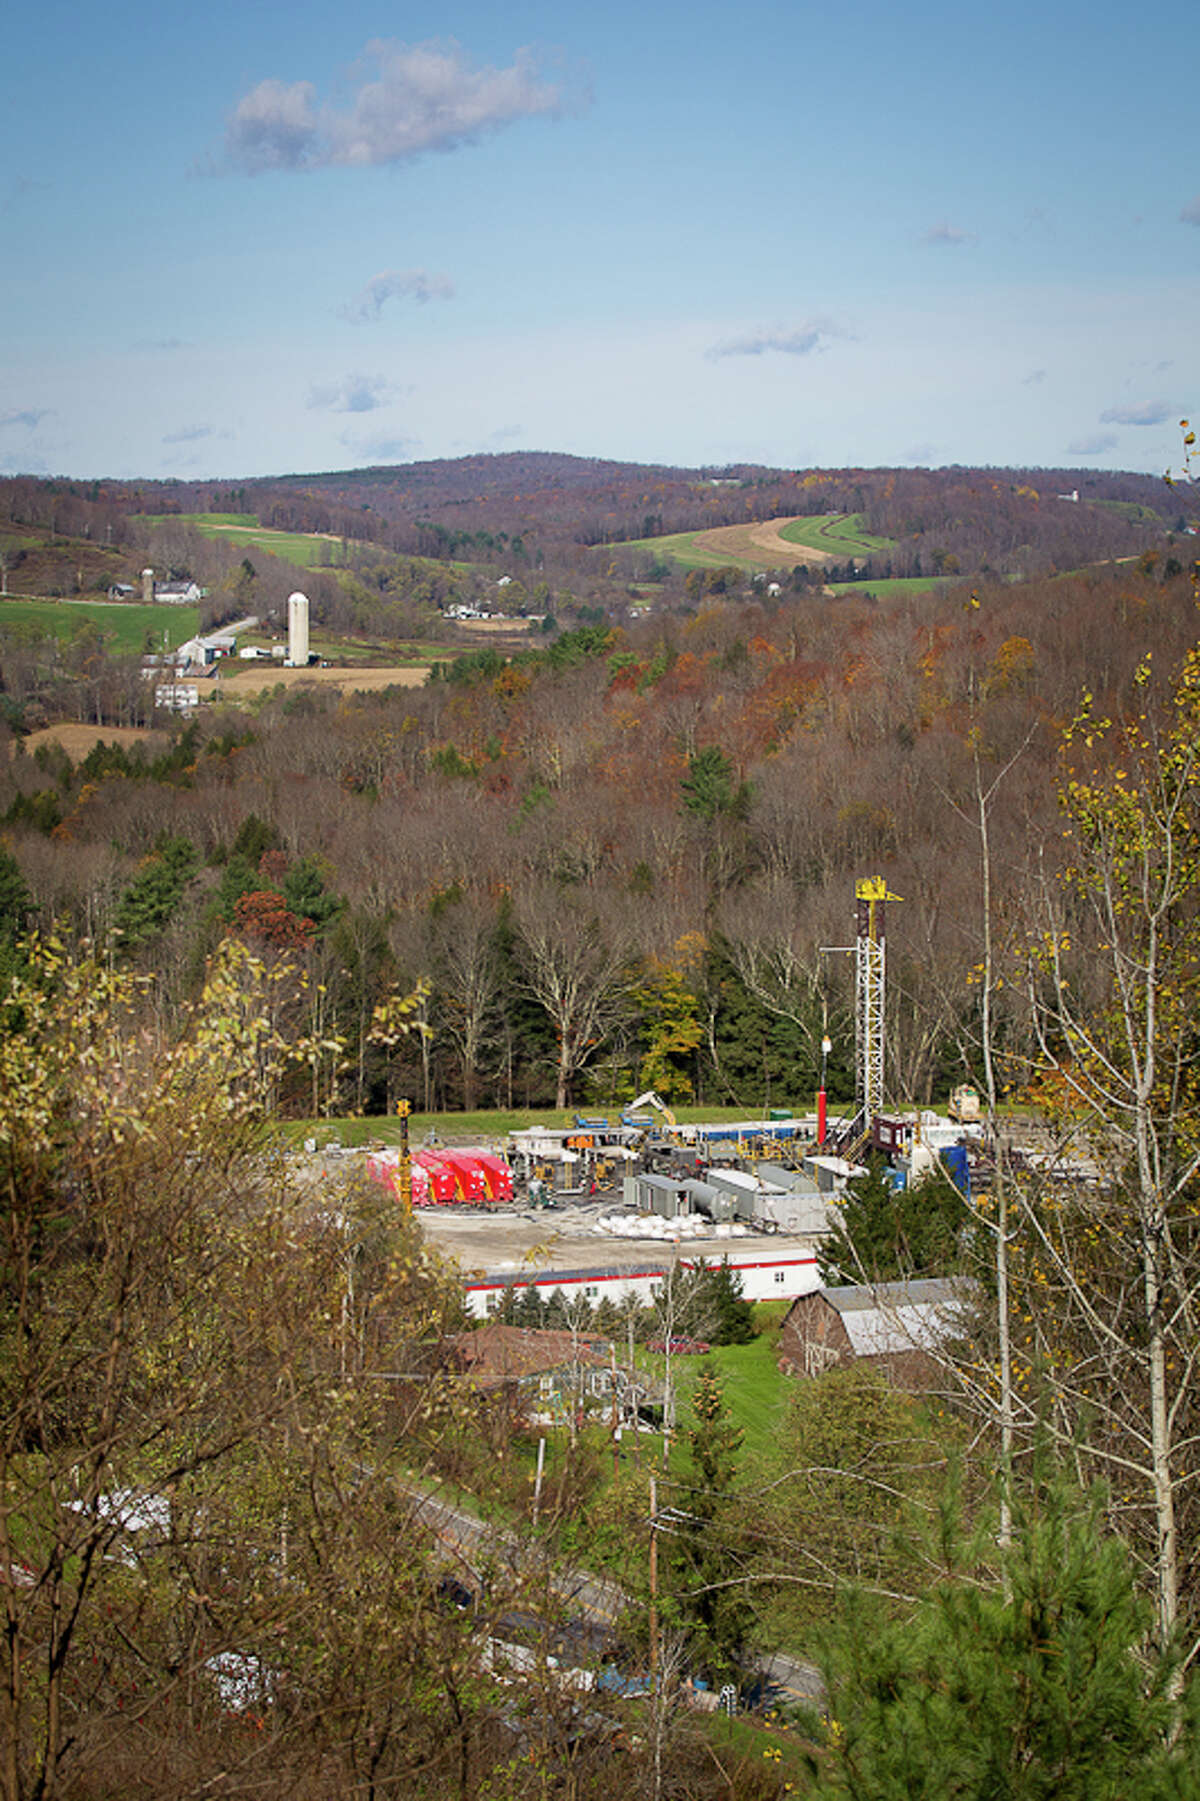 Southwestern Energy Co. has halted its drilling program after months of natural gas prices staying below break-even levels in the remote Marcellus Shale.